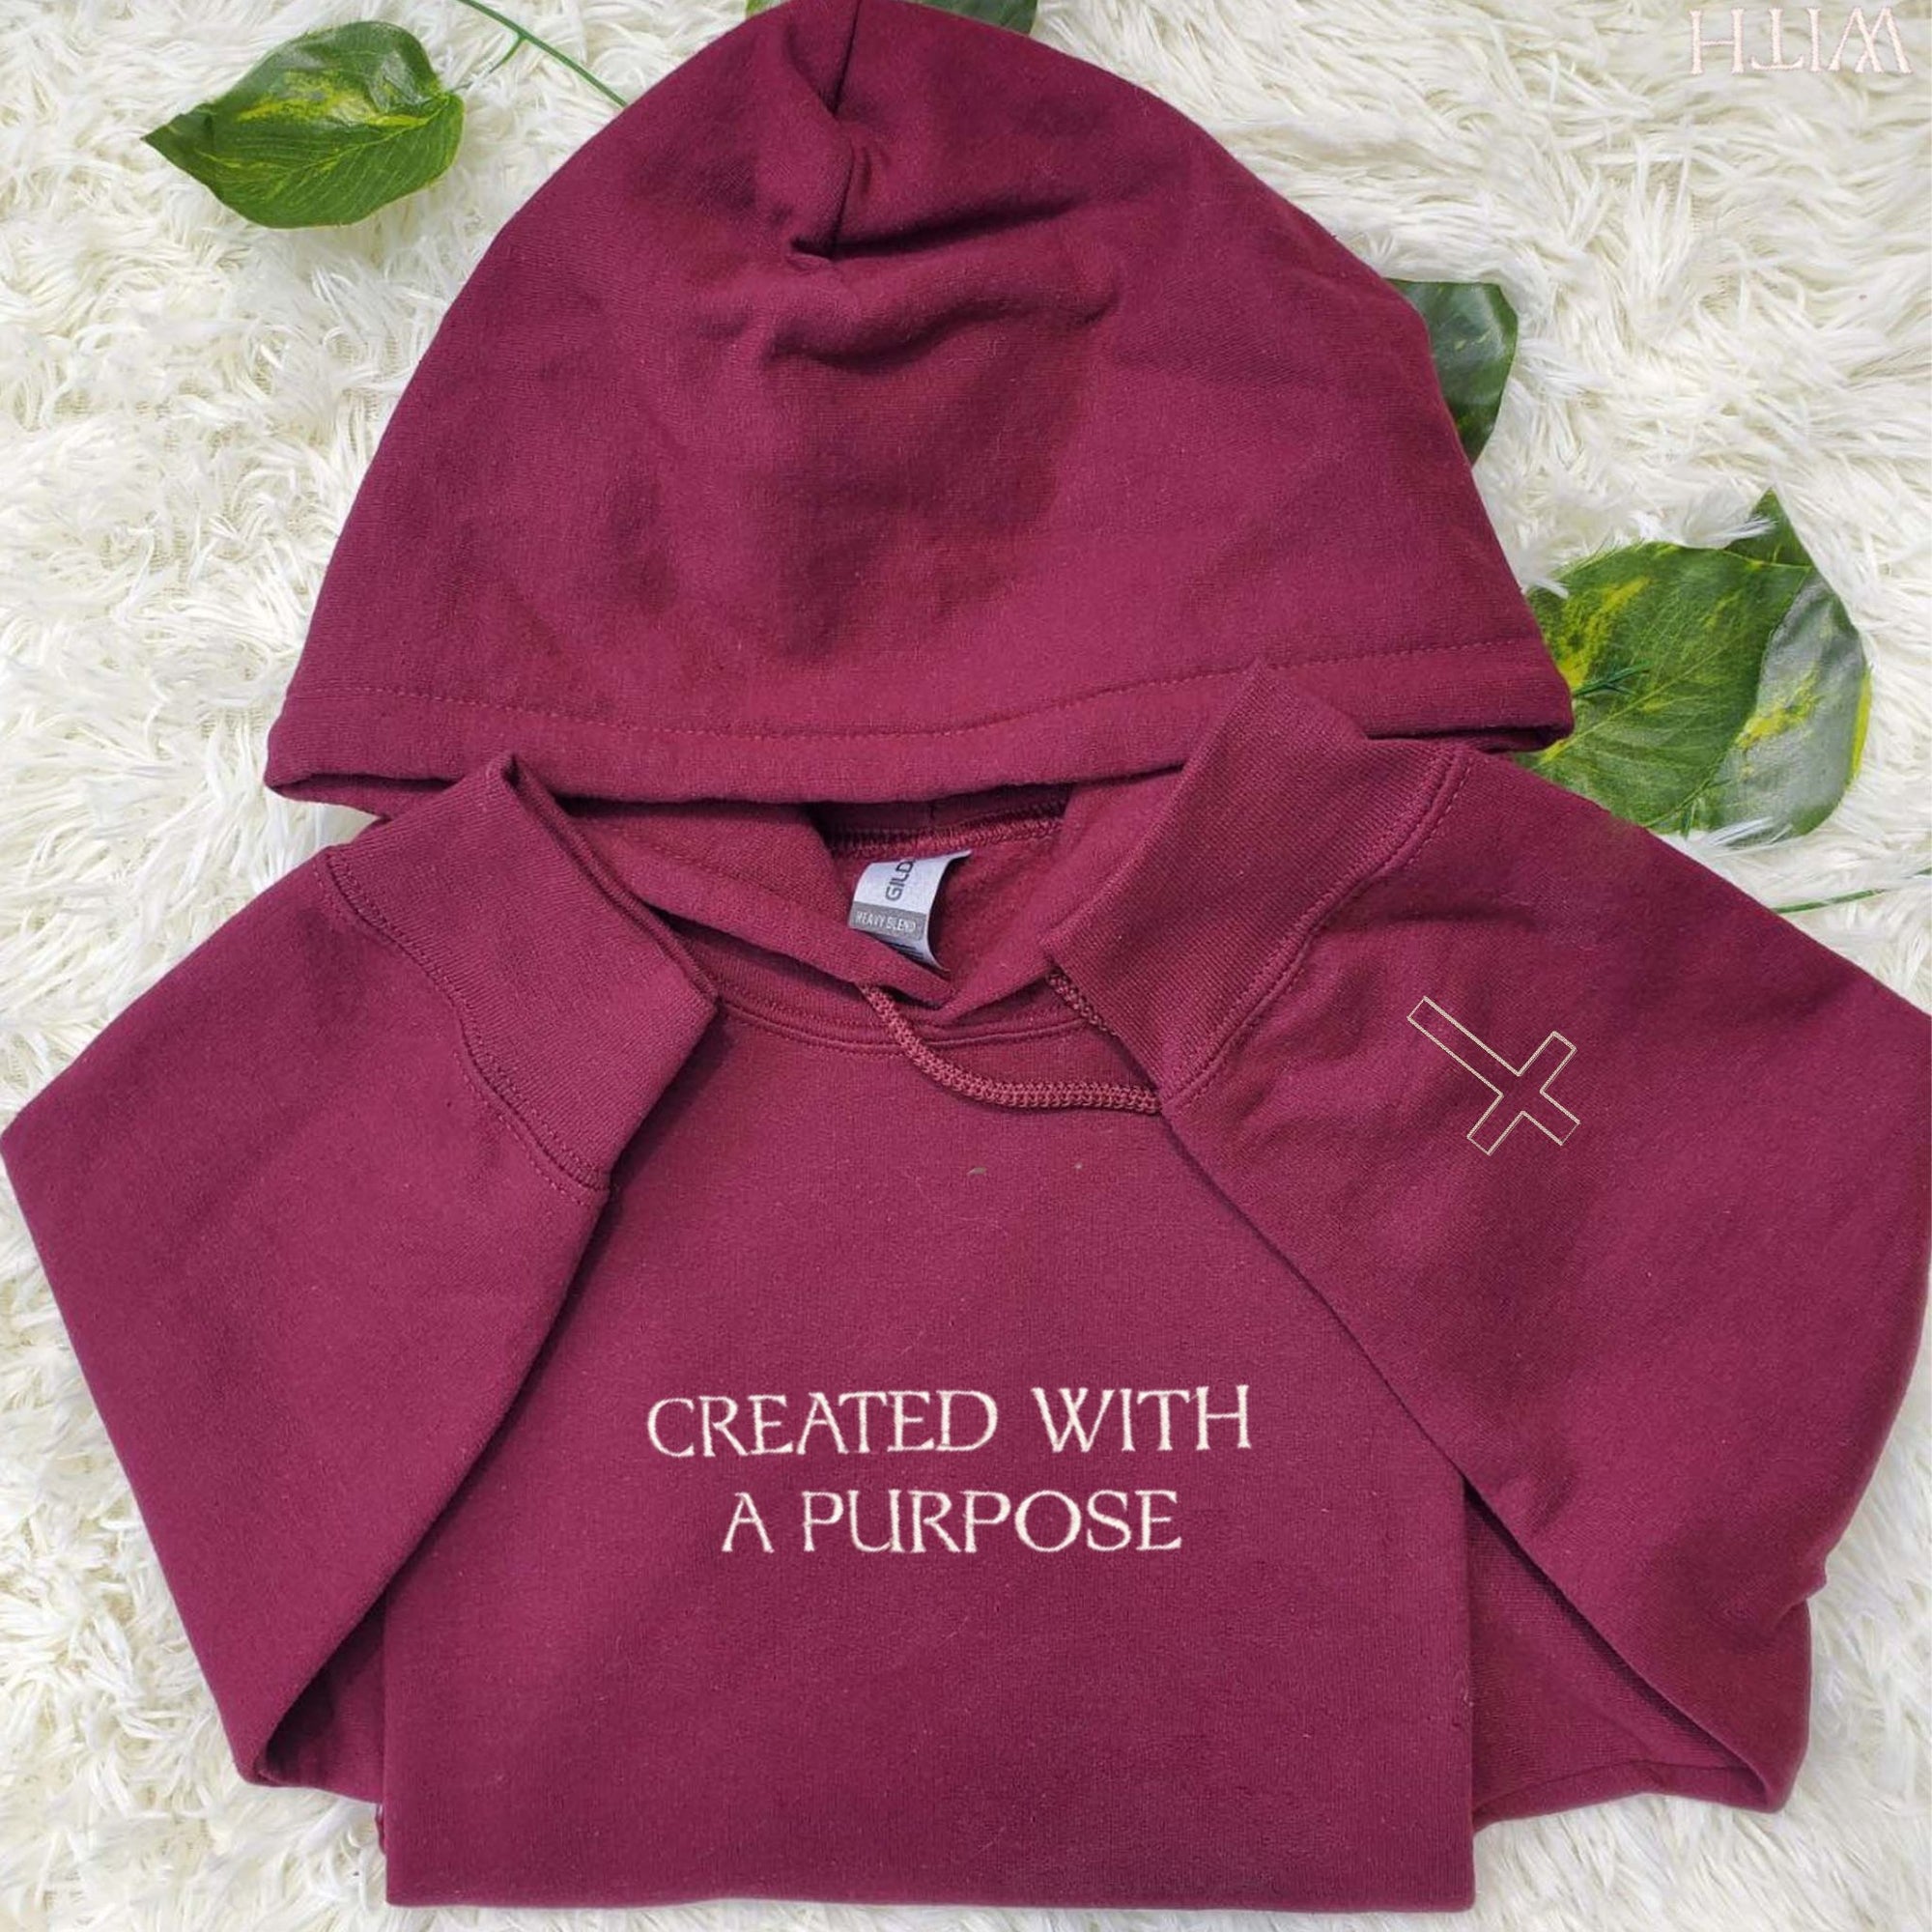 Created With A Purpose Embroidered Sweatshirt, Christian Hoodie Gift with Custom Cross on Sleeve